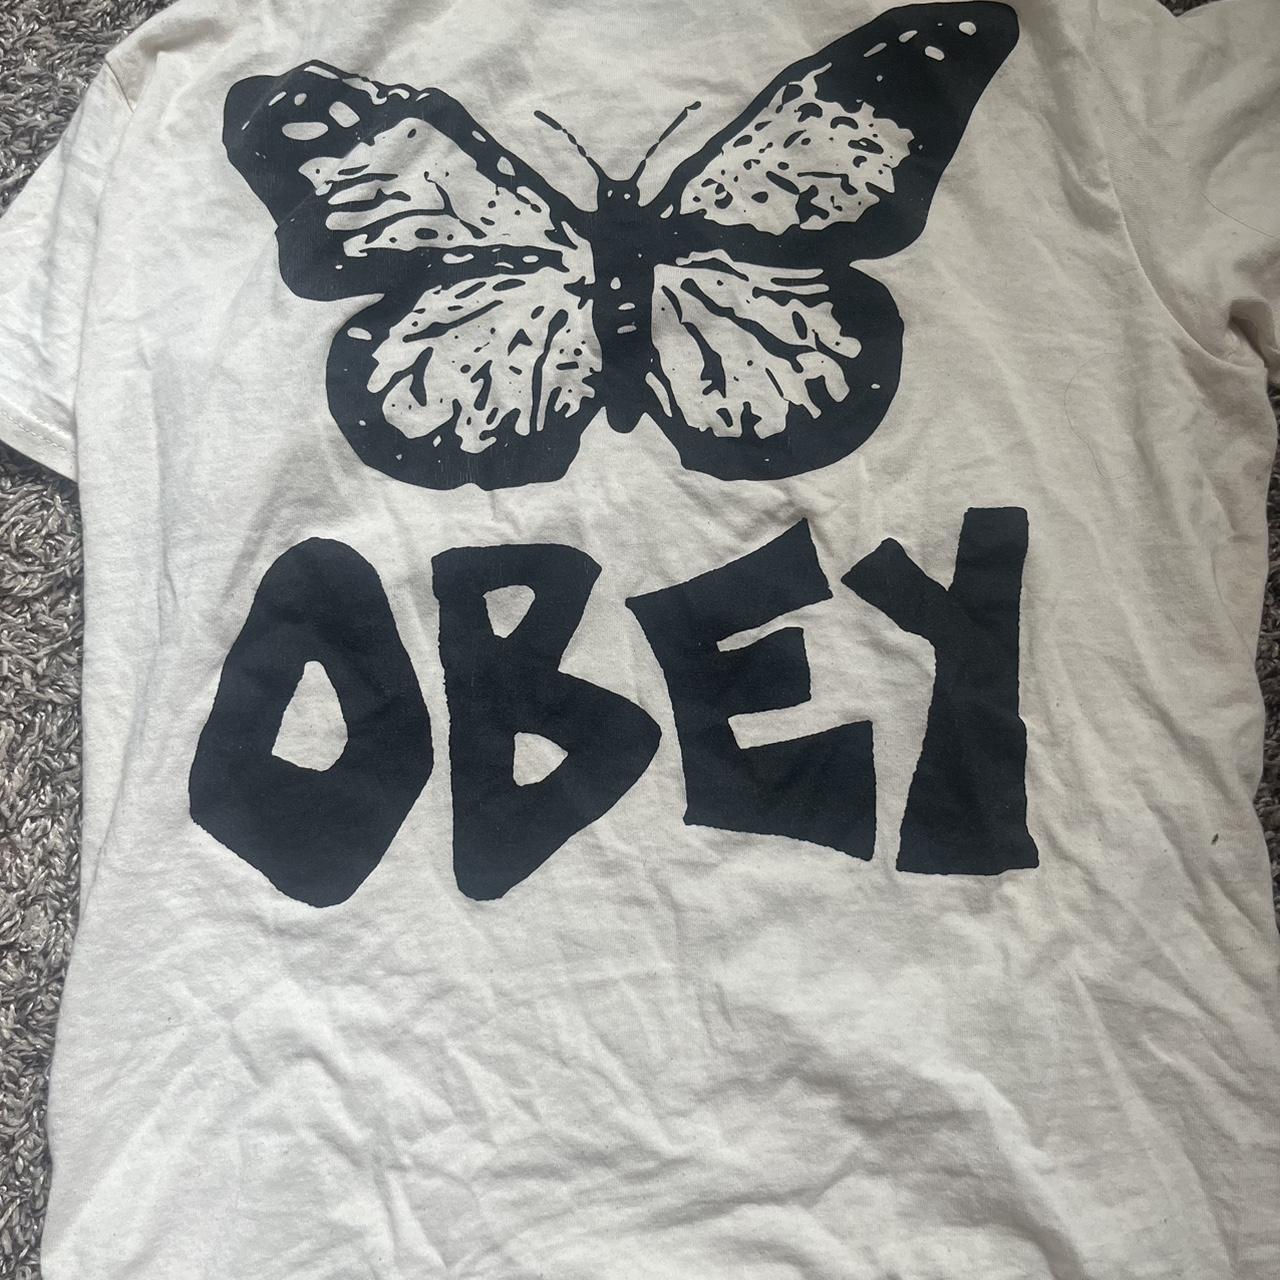 Obey Men's Cream and Tan T-shirt (2)